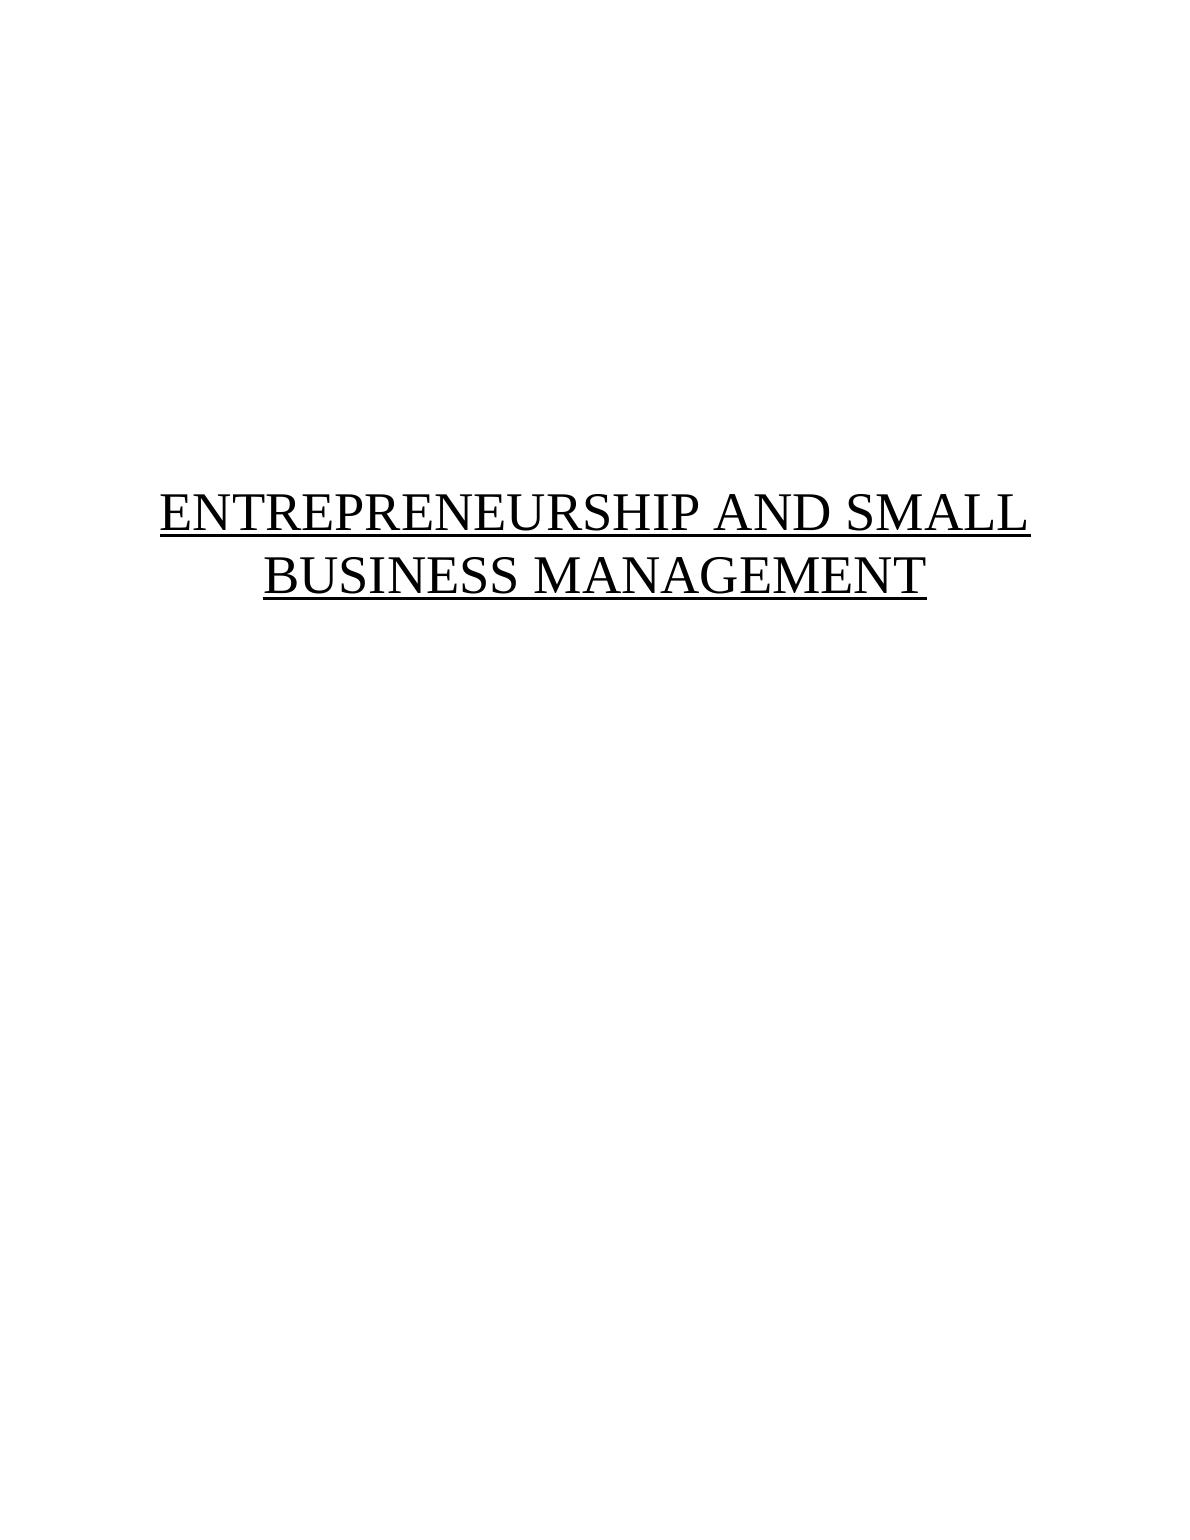 Entrepreneurship and small business management in a social economy_1